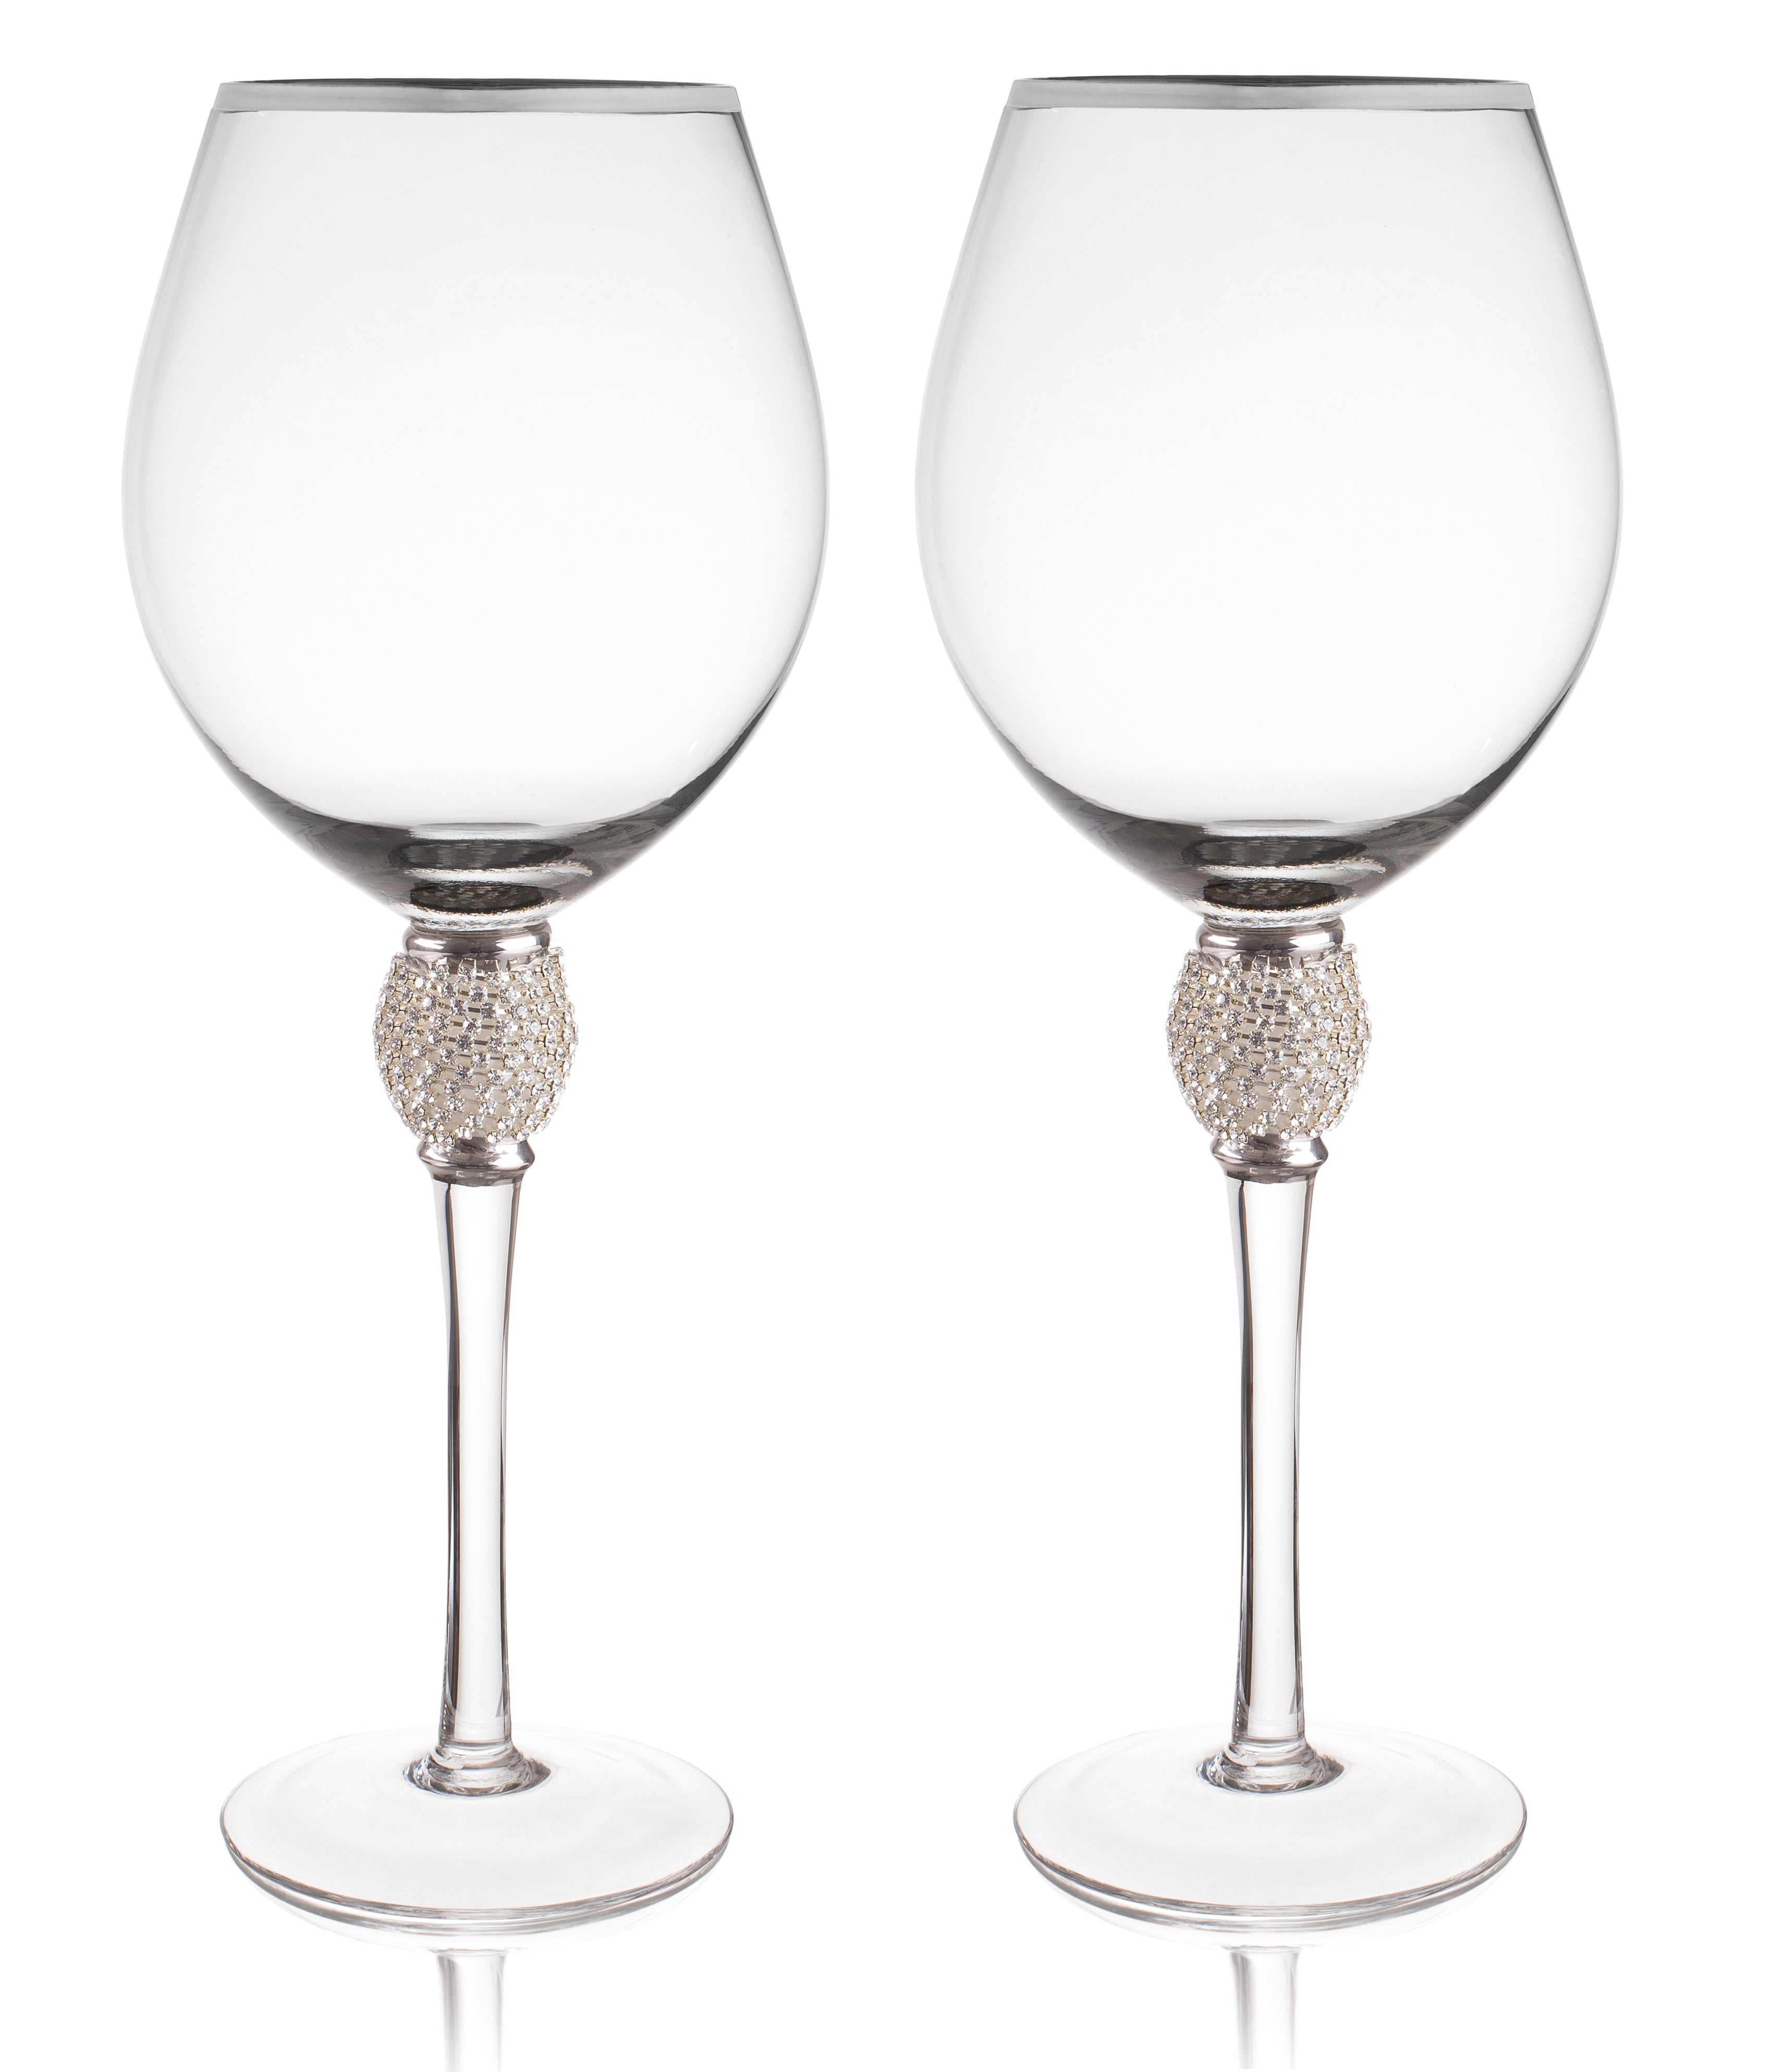 Sparkles Home Rhinestone Stemless Crystal-Filled Wine Glass - Set of 6 - Silver